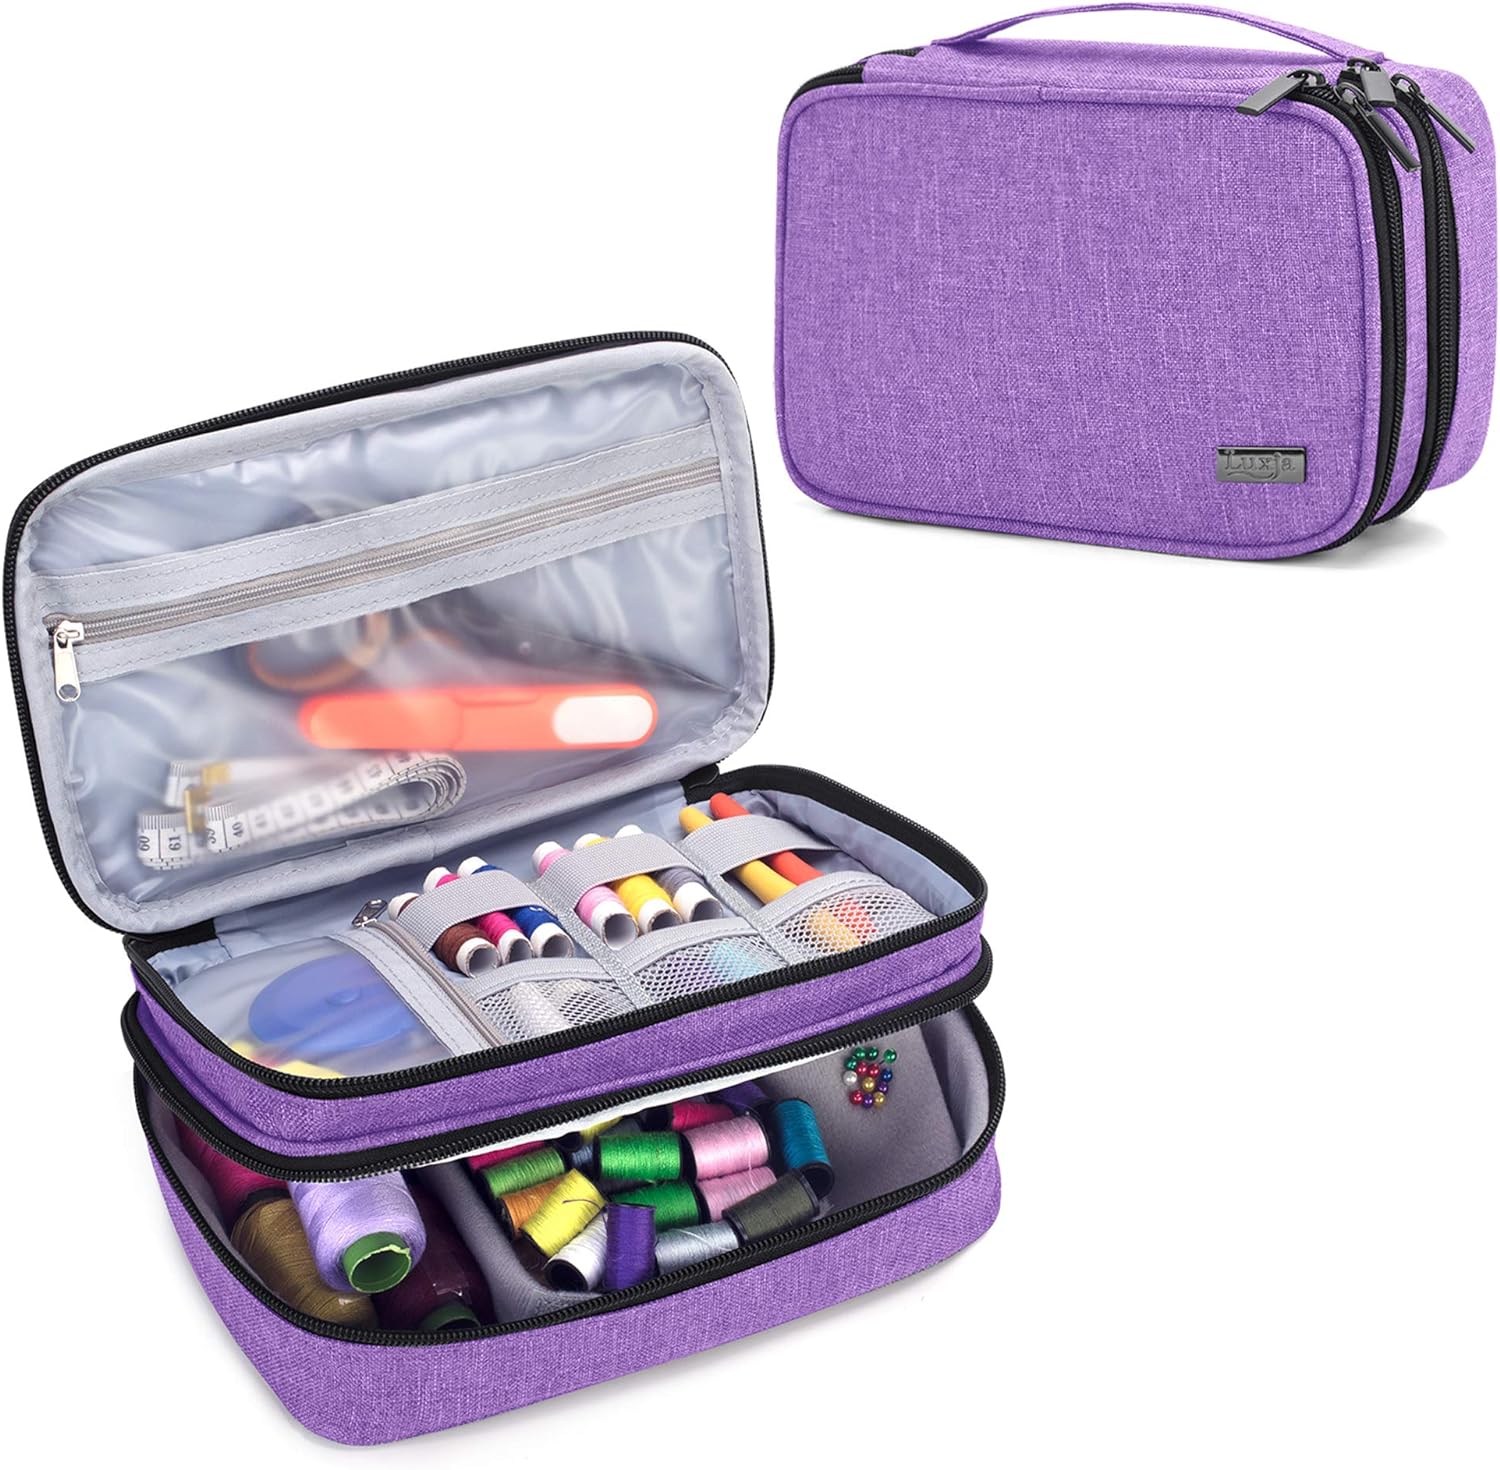 Luxja Sewing Accessories Organizer, Double-Layer Sewing Supplies Organizer for Needles, Scissors, Measuring Tape, Thread and Other Sewing Tools (NO Accessories Included), Purple